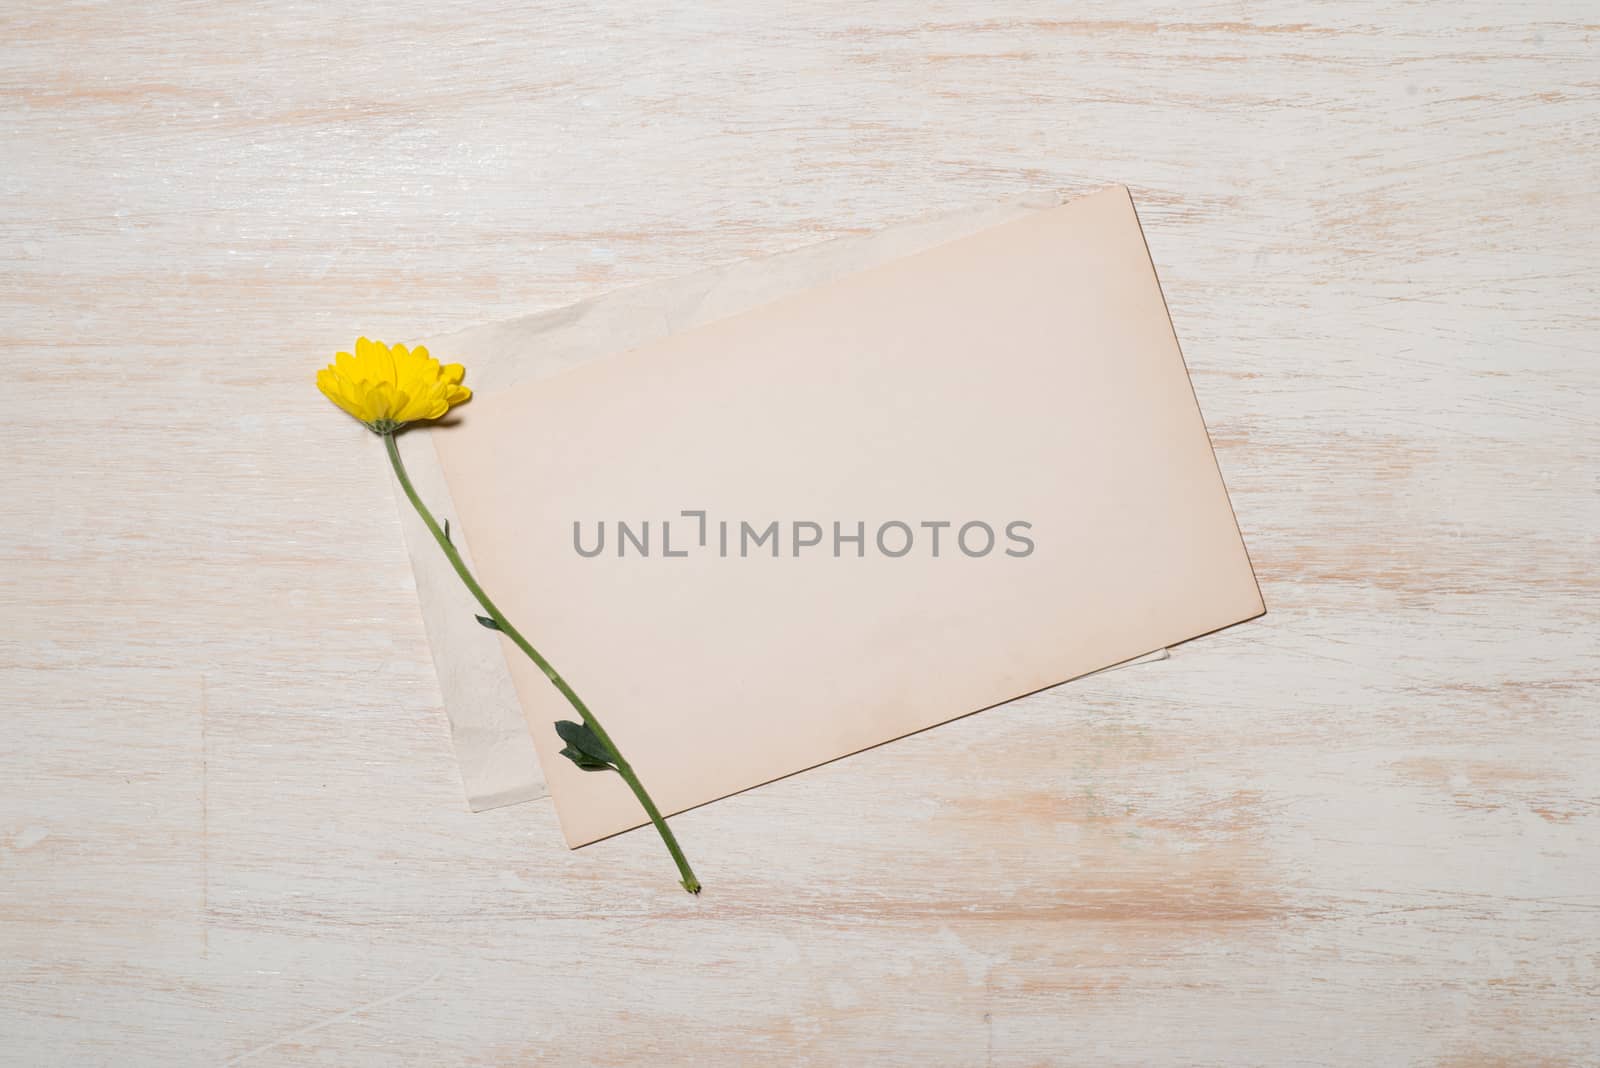 Yellow daisy bouquet on wooden table. by makidotvn